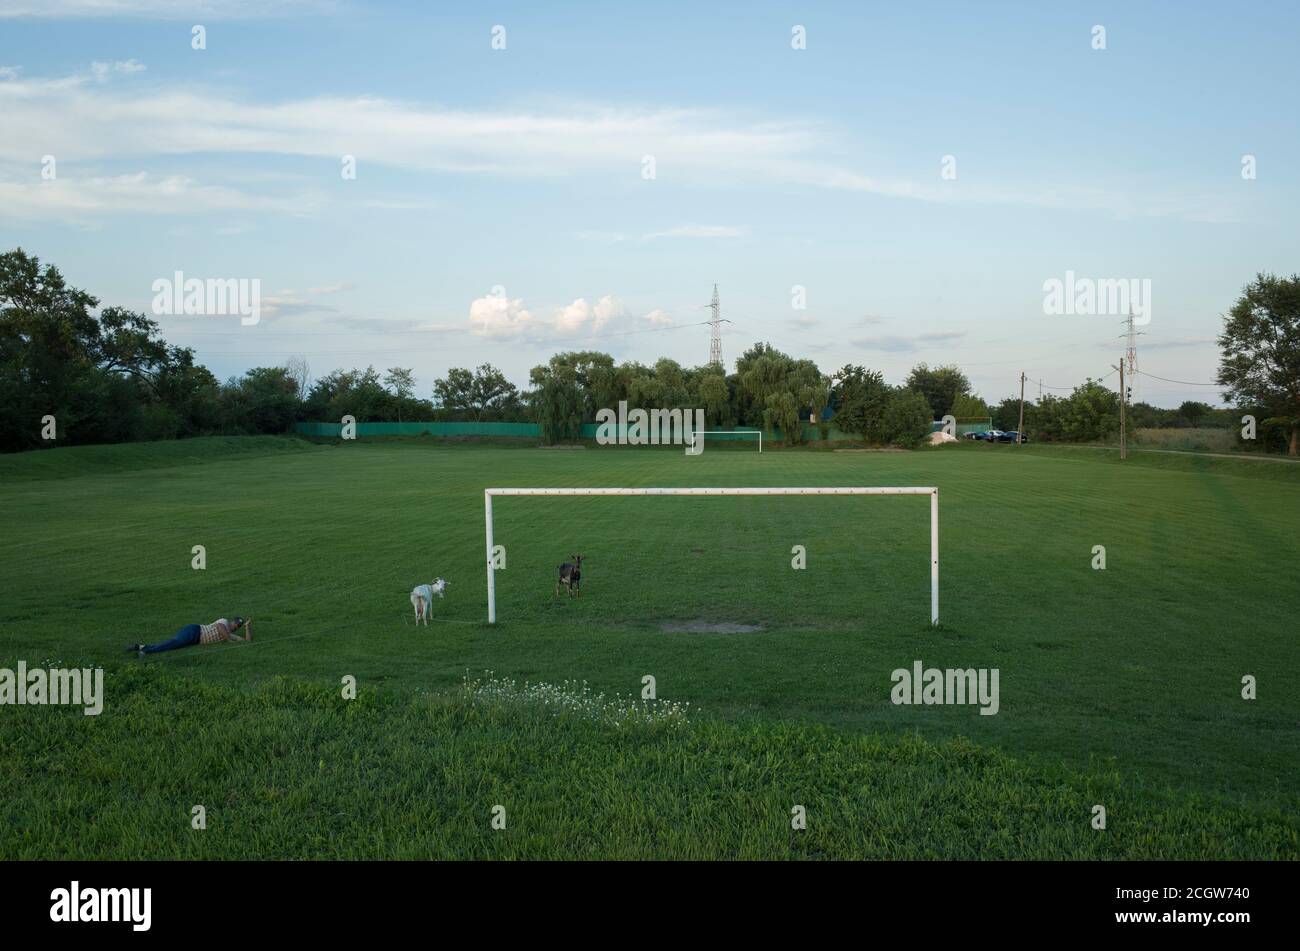 Daia Romania - July 15 2018: Empty countryside football field with grazing goats and peasant farmer near the empty goal post Stock Photo